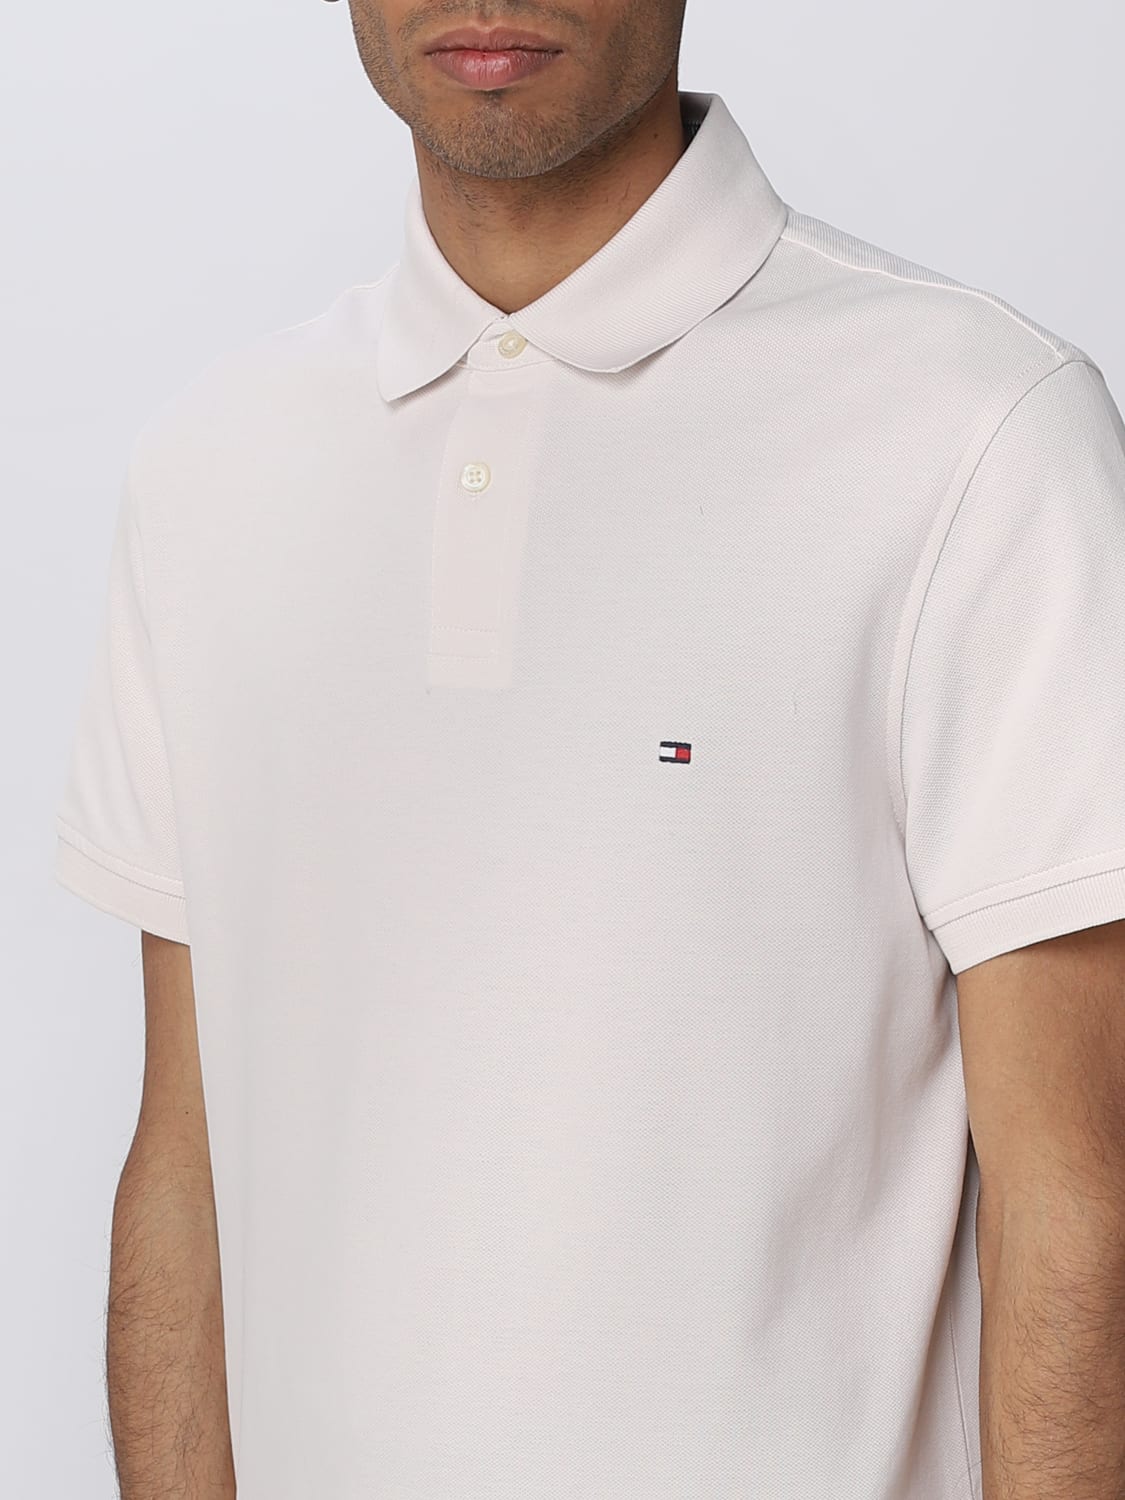 TOMMY HILFIGER: polo shirt for man - White | Tommy Hilfiger polo shirt online on